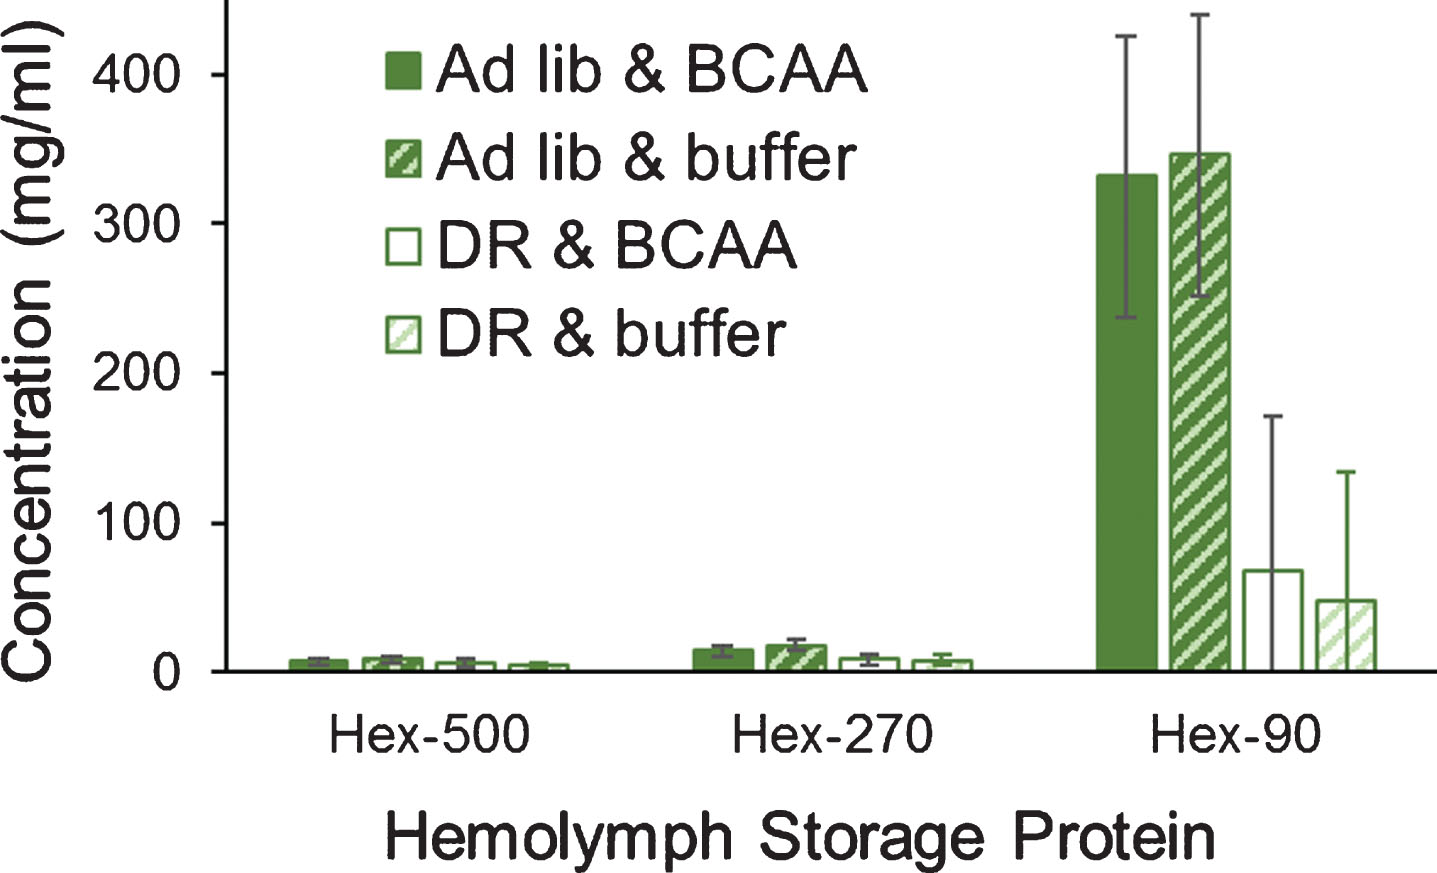 Levels of three hexameric storage proteins from the hemolymph of grasshoppers. Grasshoppers were reared upon ad libitum or DR lettuce feeding and supplementation with BCAAs or buffer. Levels of hexamerin-90 and hexamerin-270, but not hexamerin-500, were significantly reduced by a dietary restriction known to extend lifespan. Data were tested via two-way MANOVA. Error bars are one Standard Error.